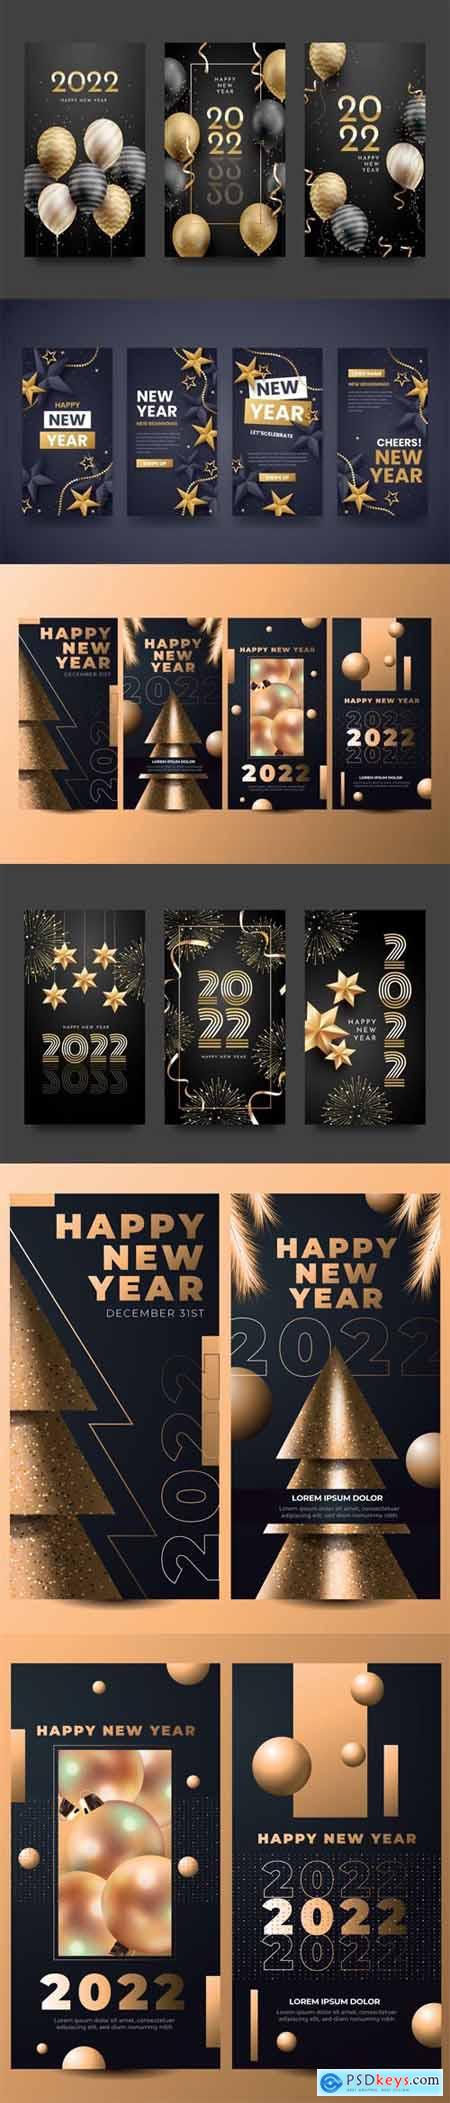 New Year 2022 Instagram Stories Vector Templates Collection